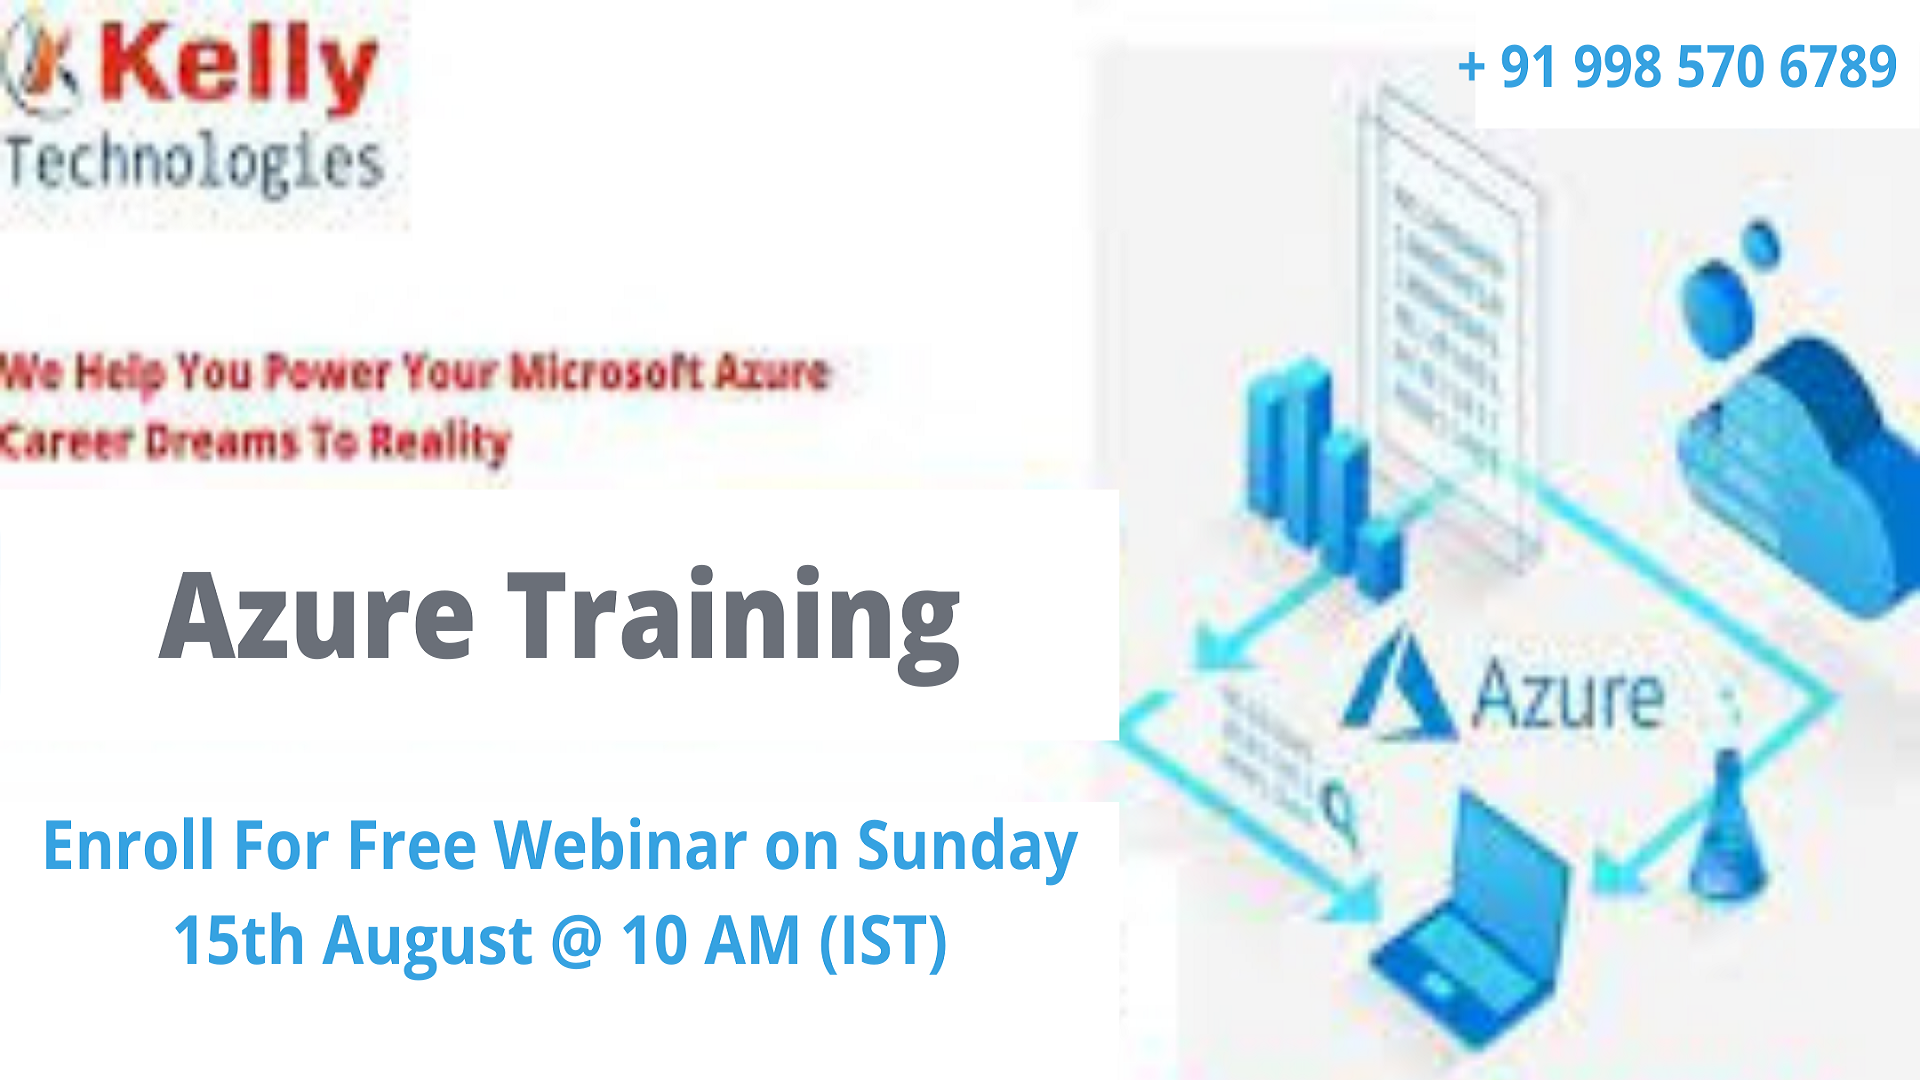 Join Us For Azure Exclusive Free Webinar On 15th August @ 10 AM (IST) ‘Career In Cloud’ By Kelly Technologies., Hyderabad, Telangana, India